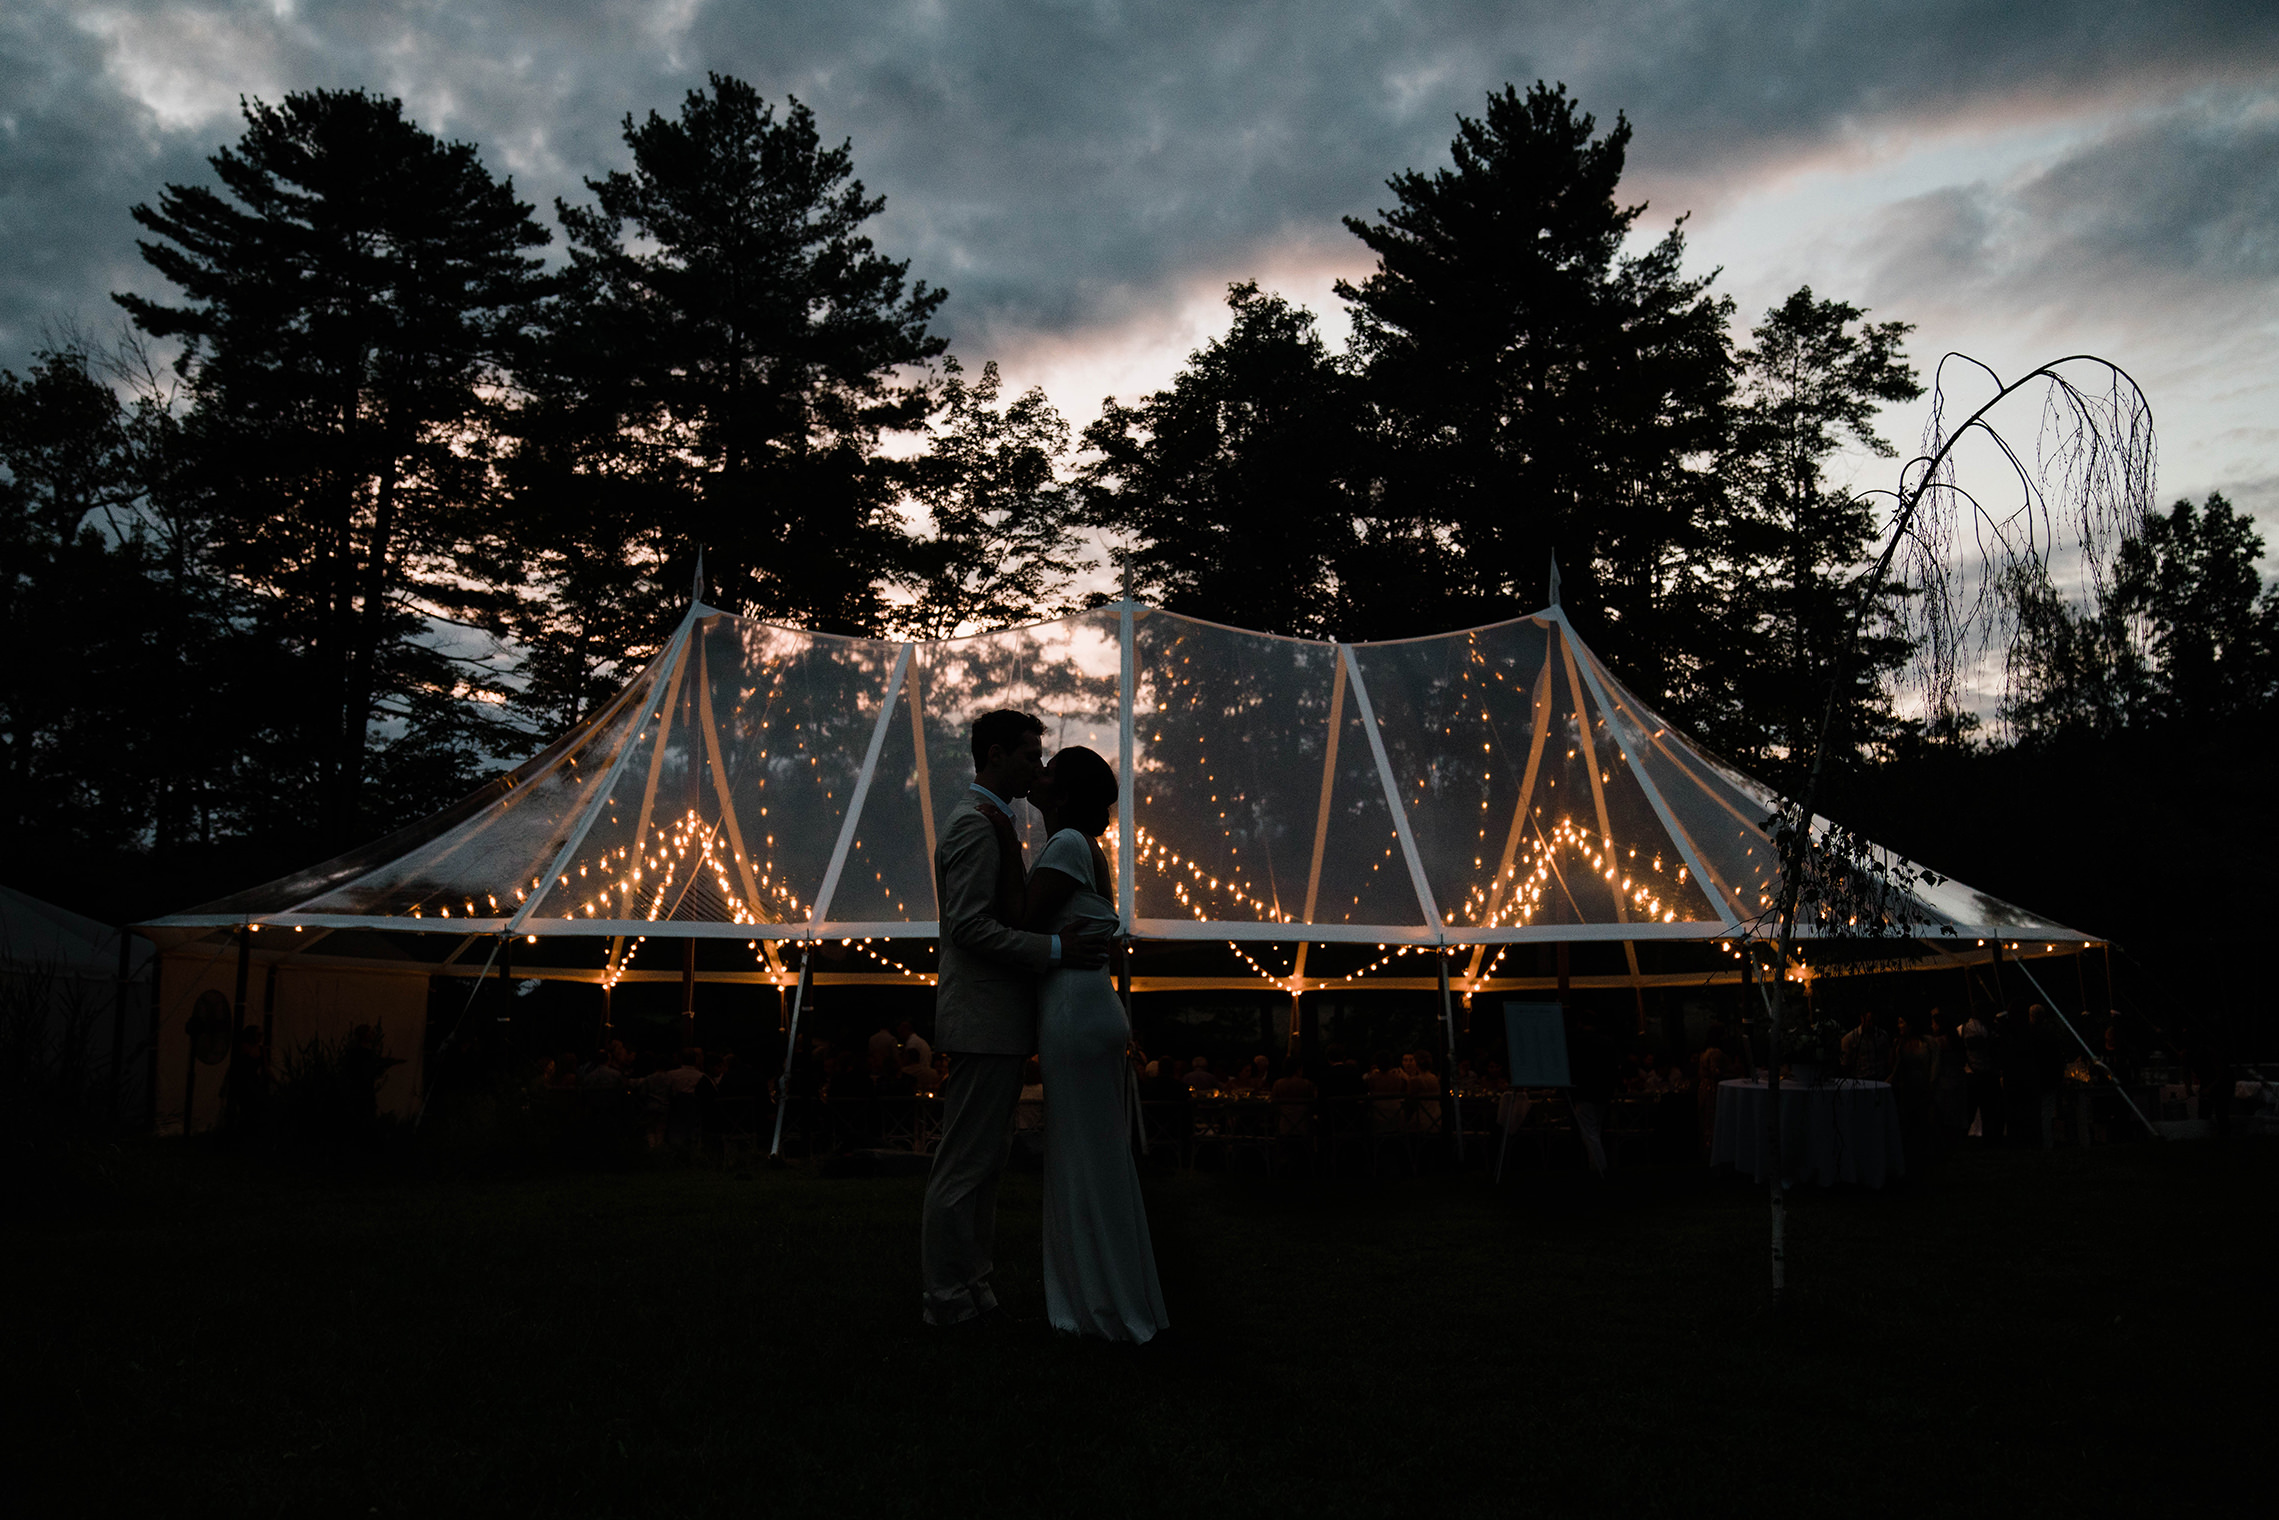 A documentary photograph featured in the best of wedding photography of 2019 showing a couple kissing outside the tent during their wedding reception